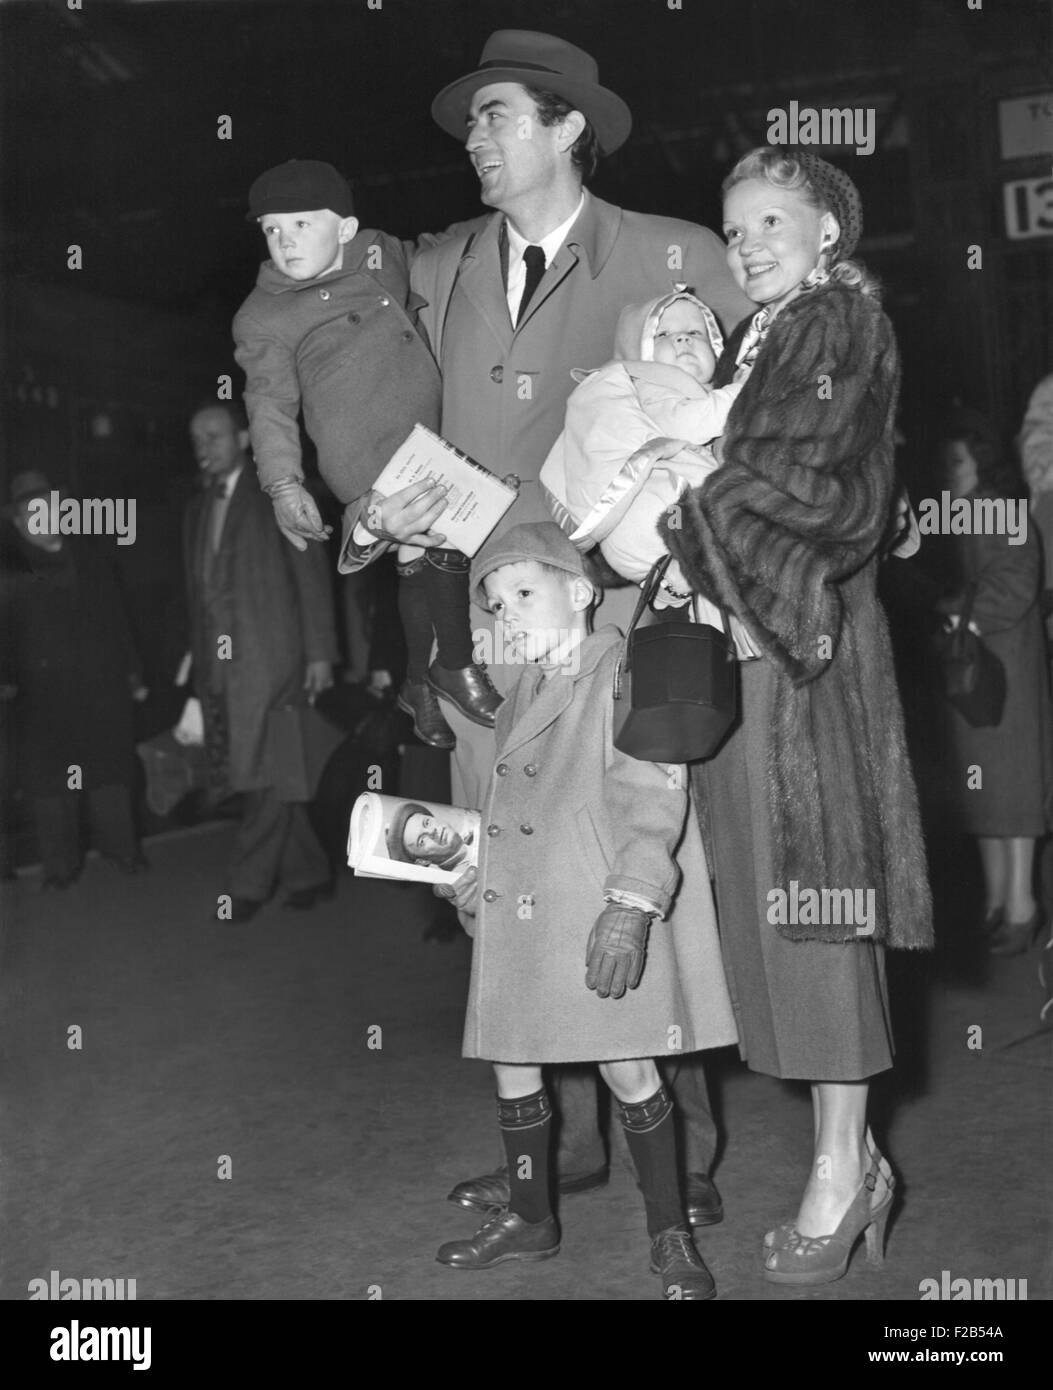 Actor Gregory Peck and his wife, Greta Kukkonen, and children on their arrival at Waterloo. Traveling on the Queen Elizabeth Boat Train, L-R: Jonathan, aged 5; Cary Paul, 6 months; and Stephen 4 years. Jan 4, 1950. - (BSLOC 2014 17 83) Stock Photo